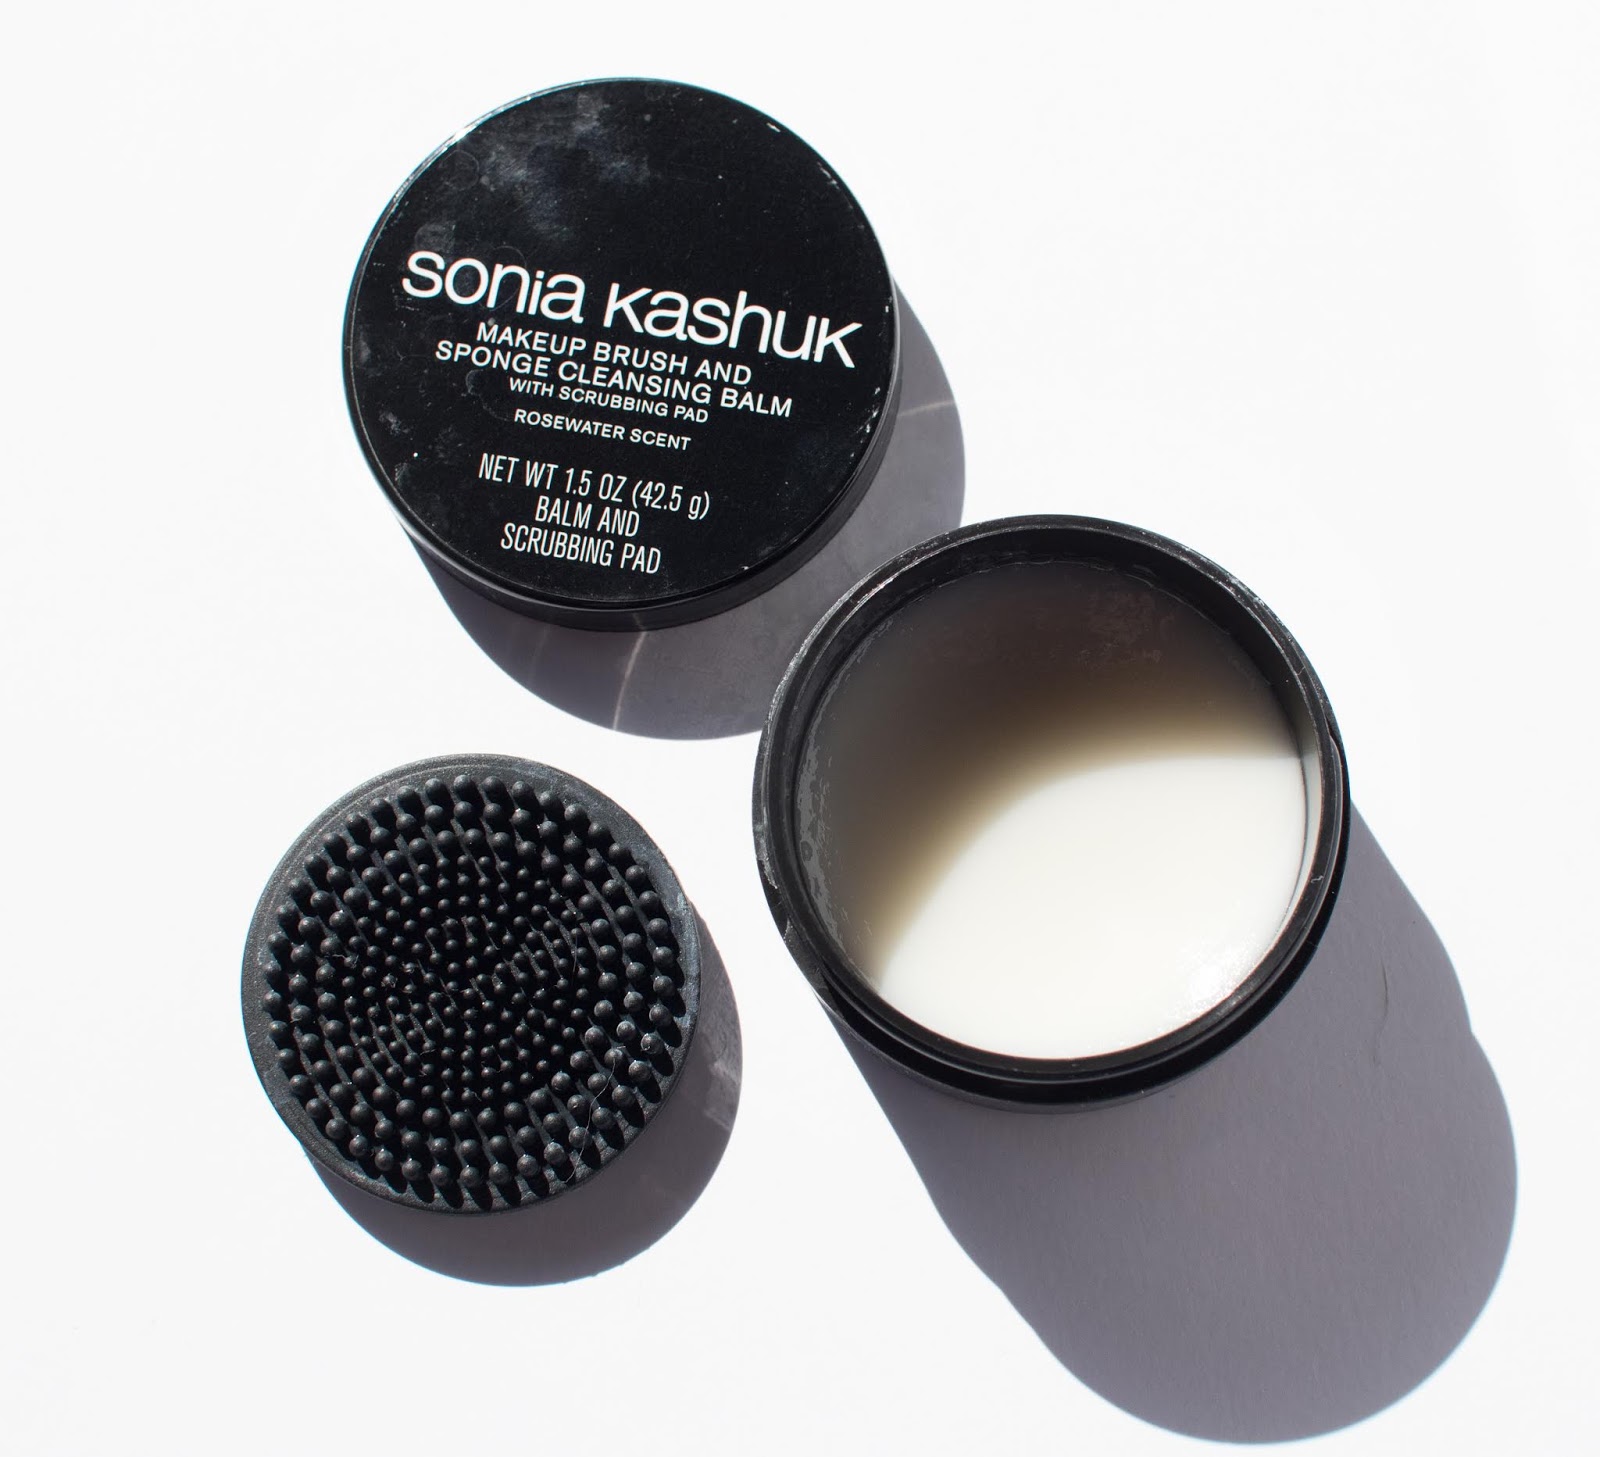 Sonia Kashuk Makeup Brush Solid Bar Soap Cleanser Review